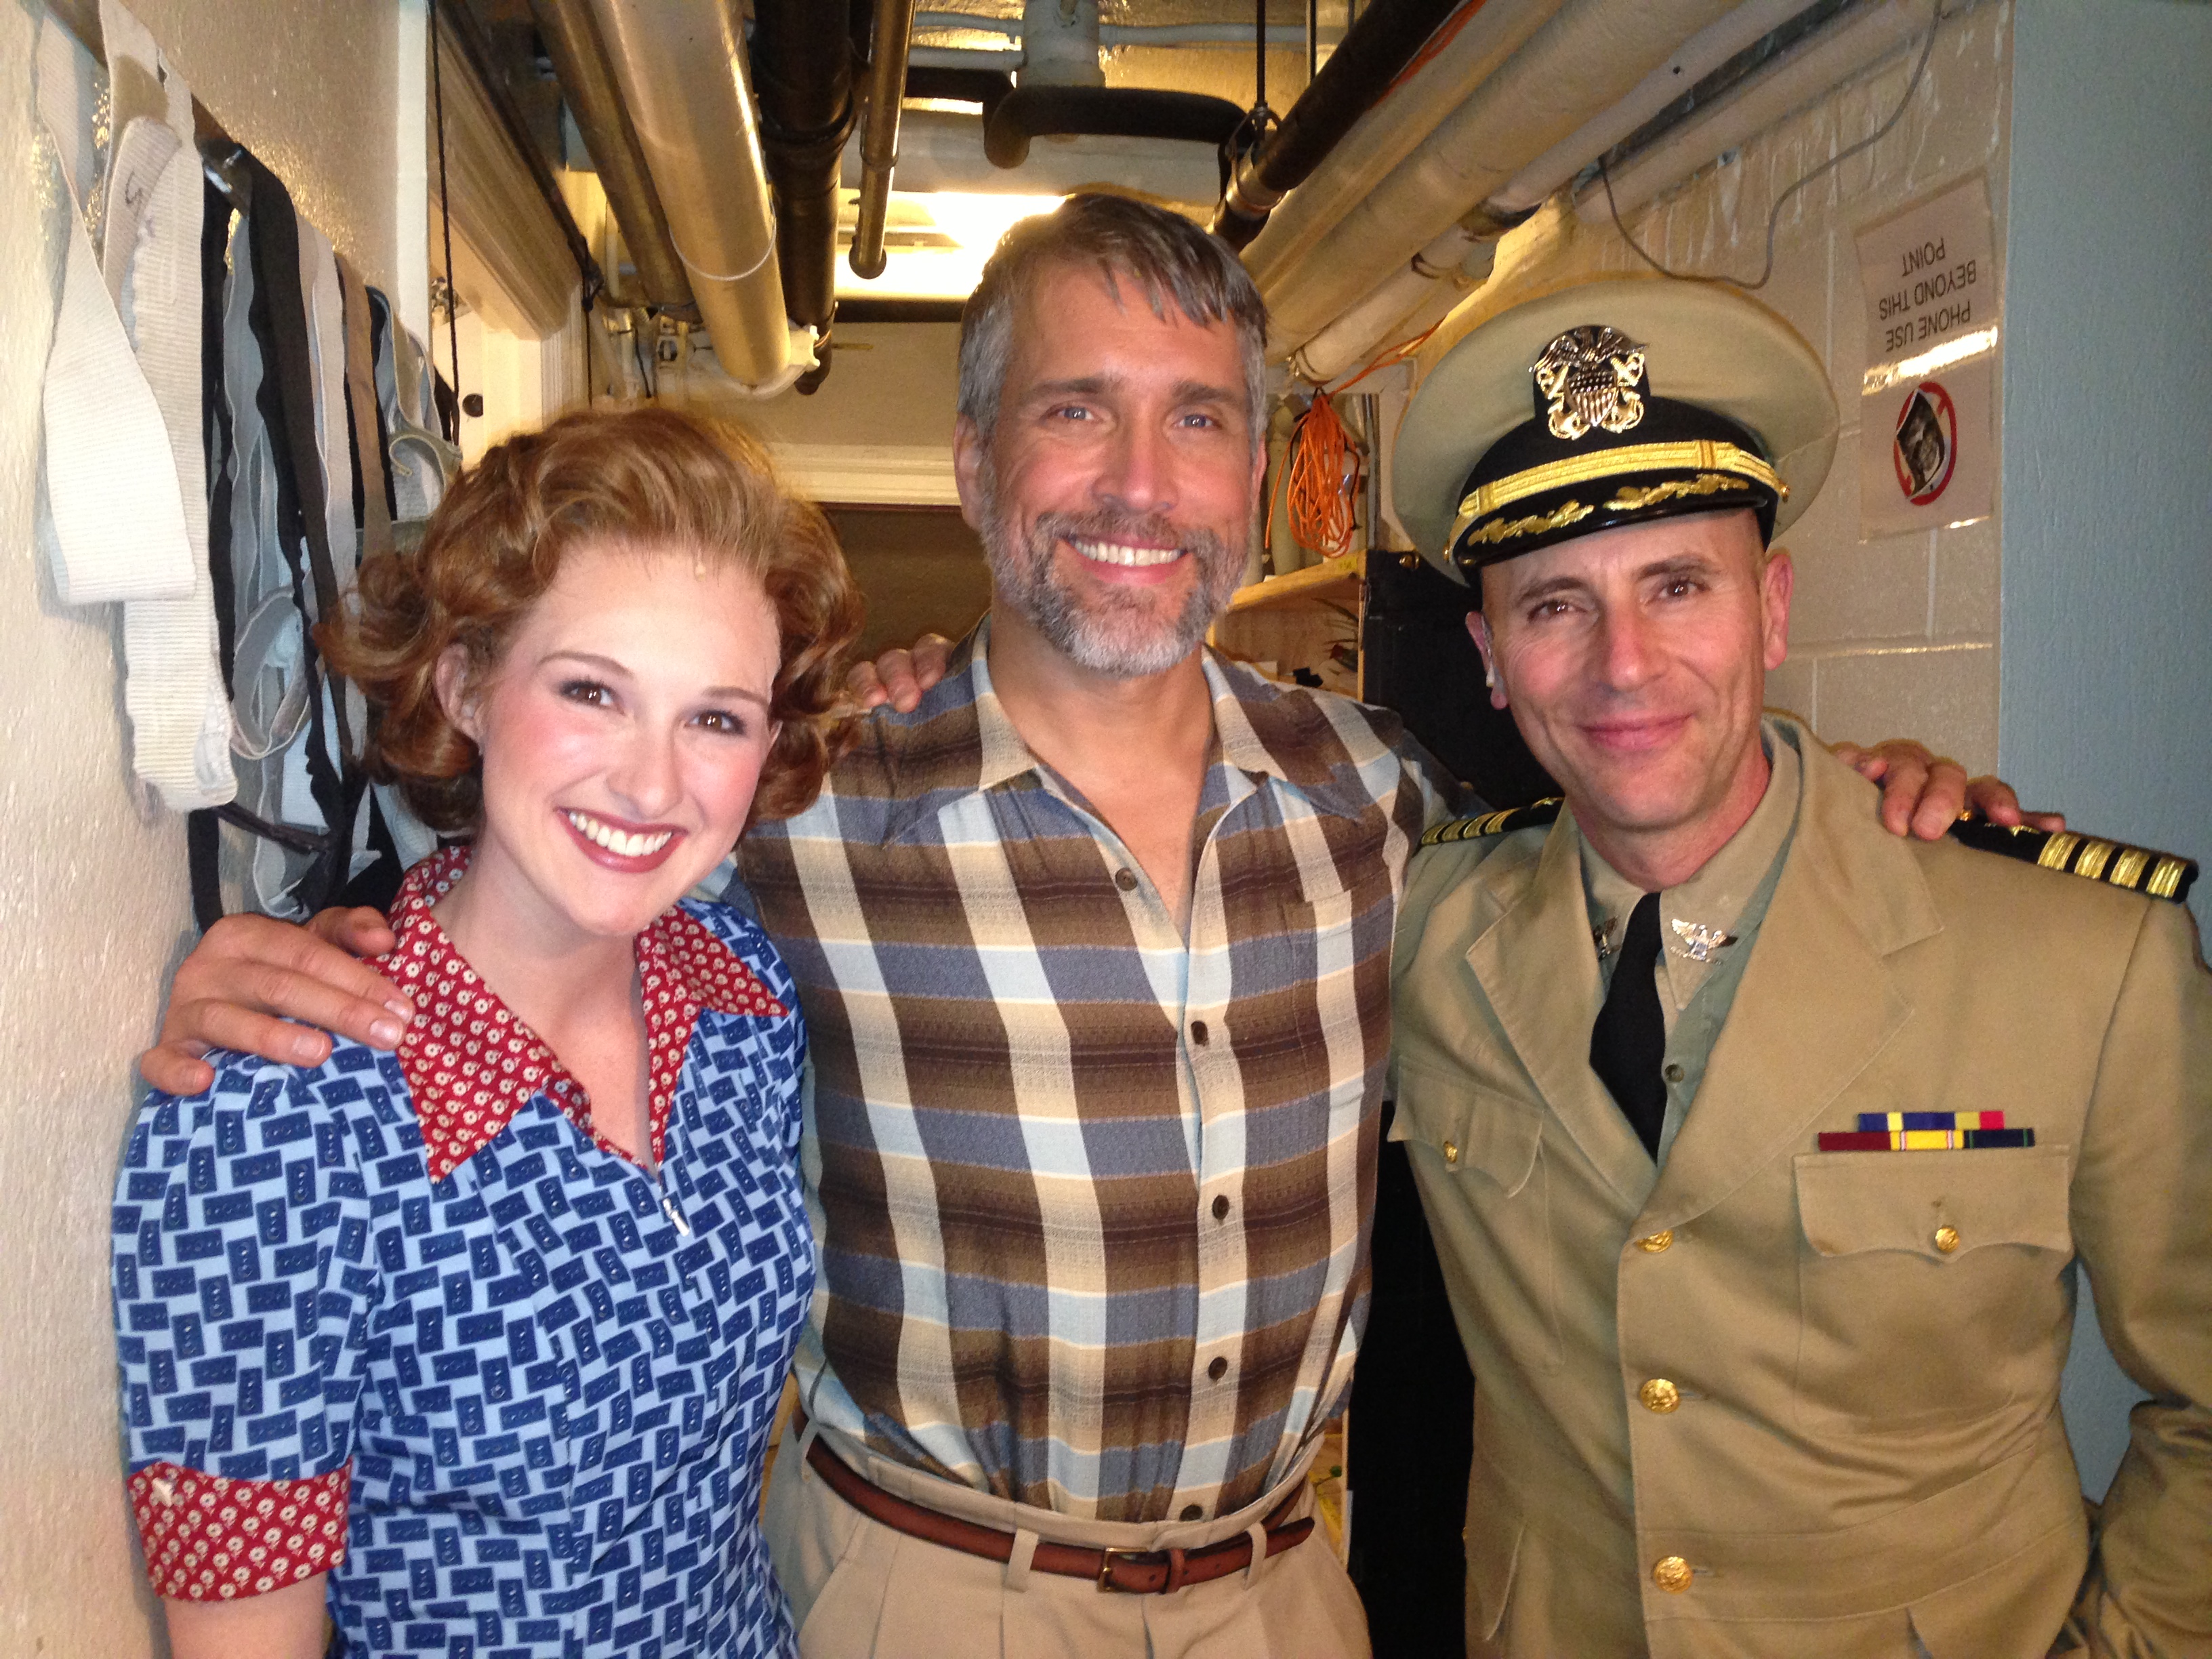 Erin Mackey, Mike McGowan, & Jordan Lage backstage at Paper Mill Playhouse's revival of SOUTH PACIFIC (2014).